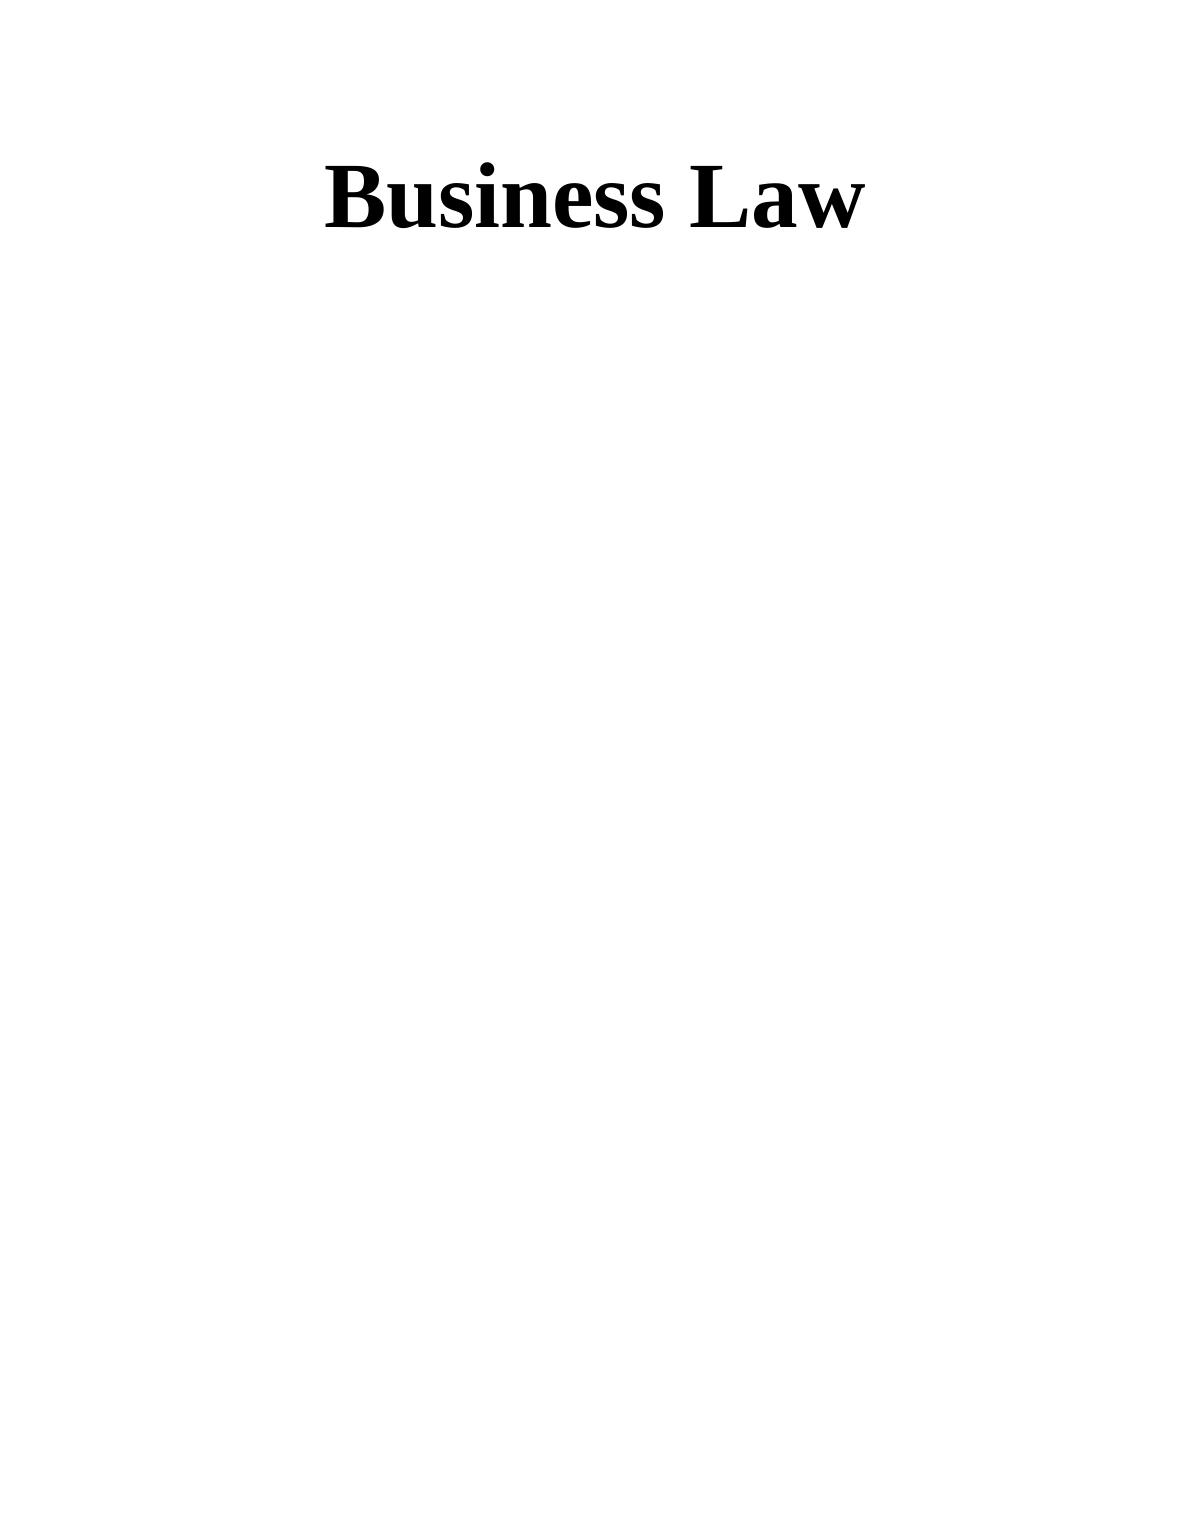 Principles Of Busienss Law_1